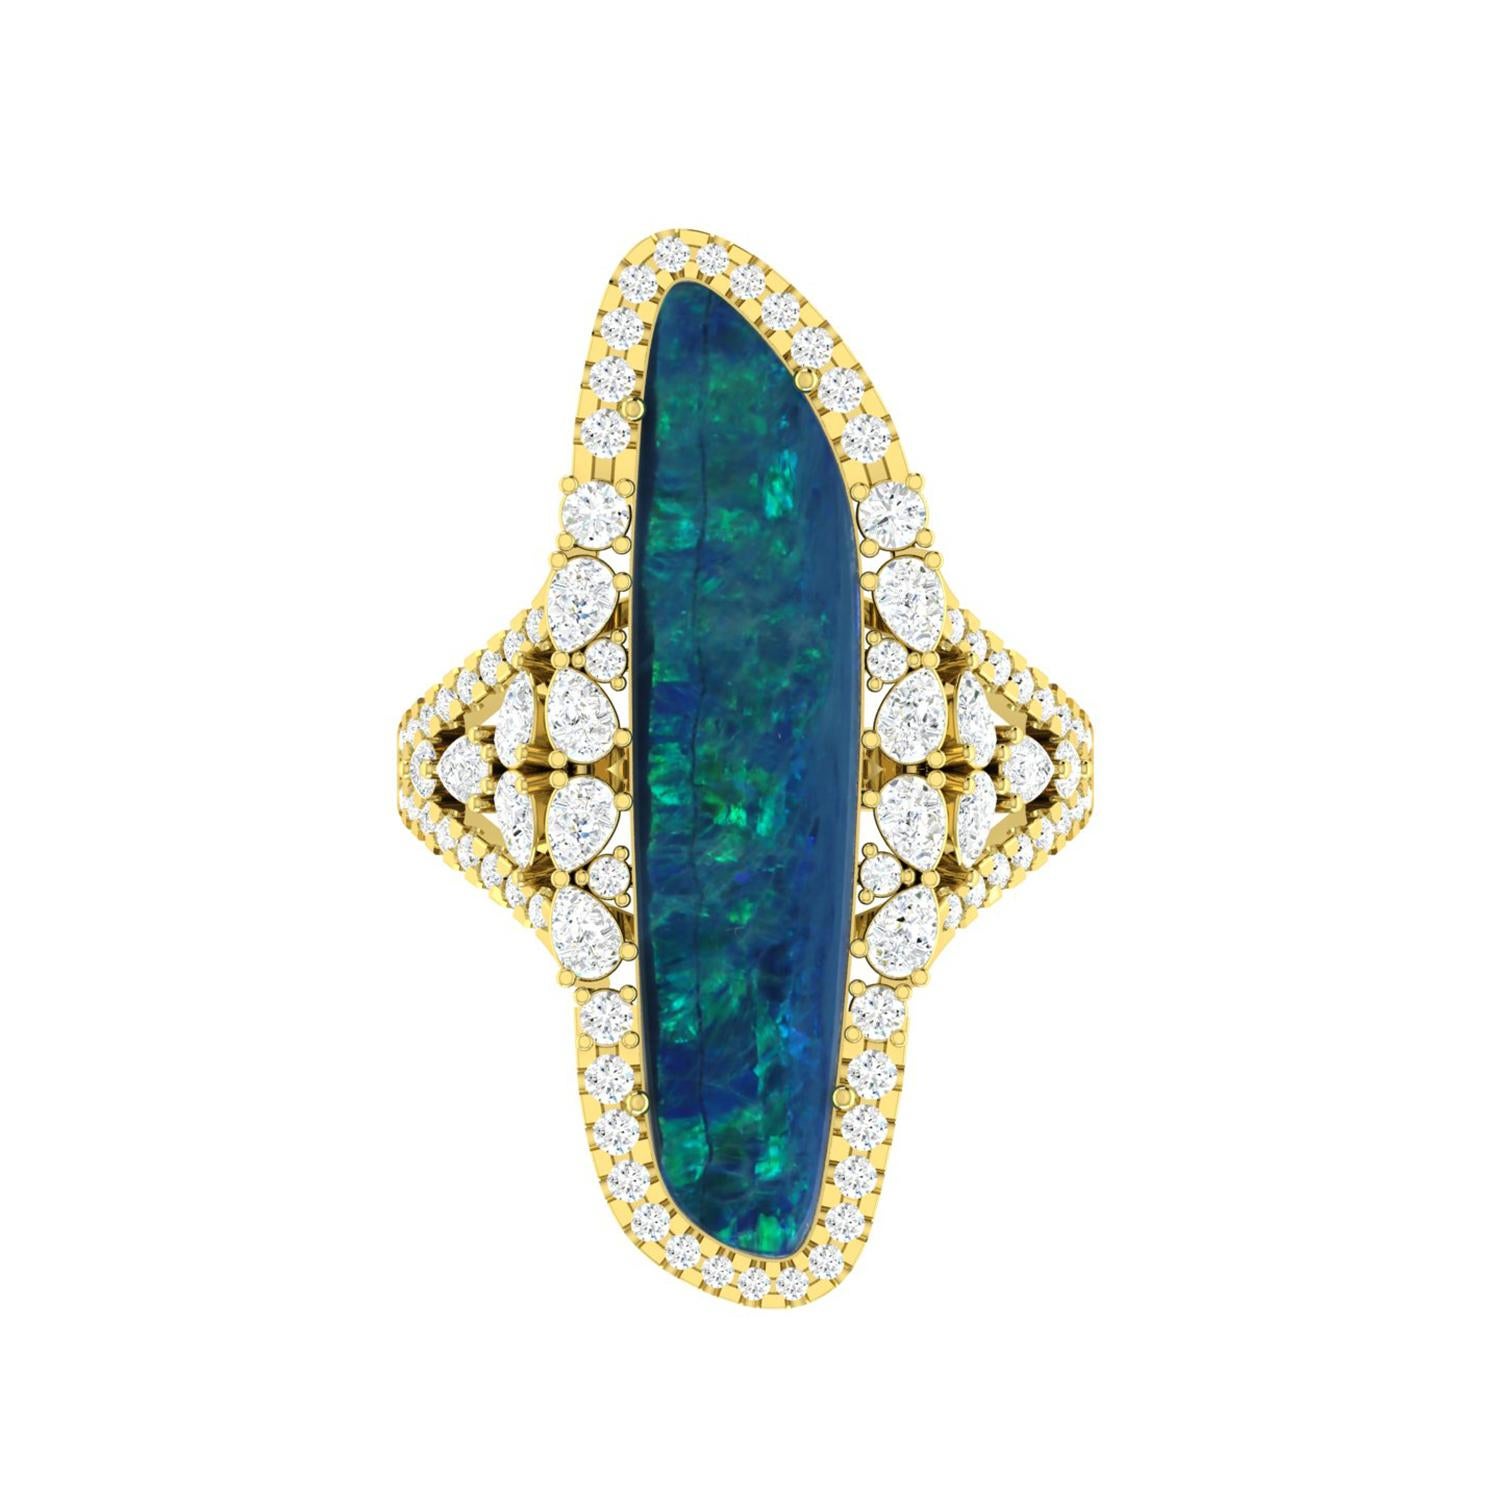 Artisan's beautiful and One-of-A-Kind Diamond Opal 18K Yellow Gold Ring in size 7. 

18k Gold: 5.8gms
Diamond: 1.34cts
Opal: 4.35cts


